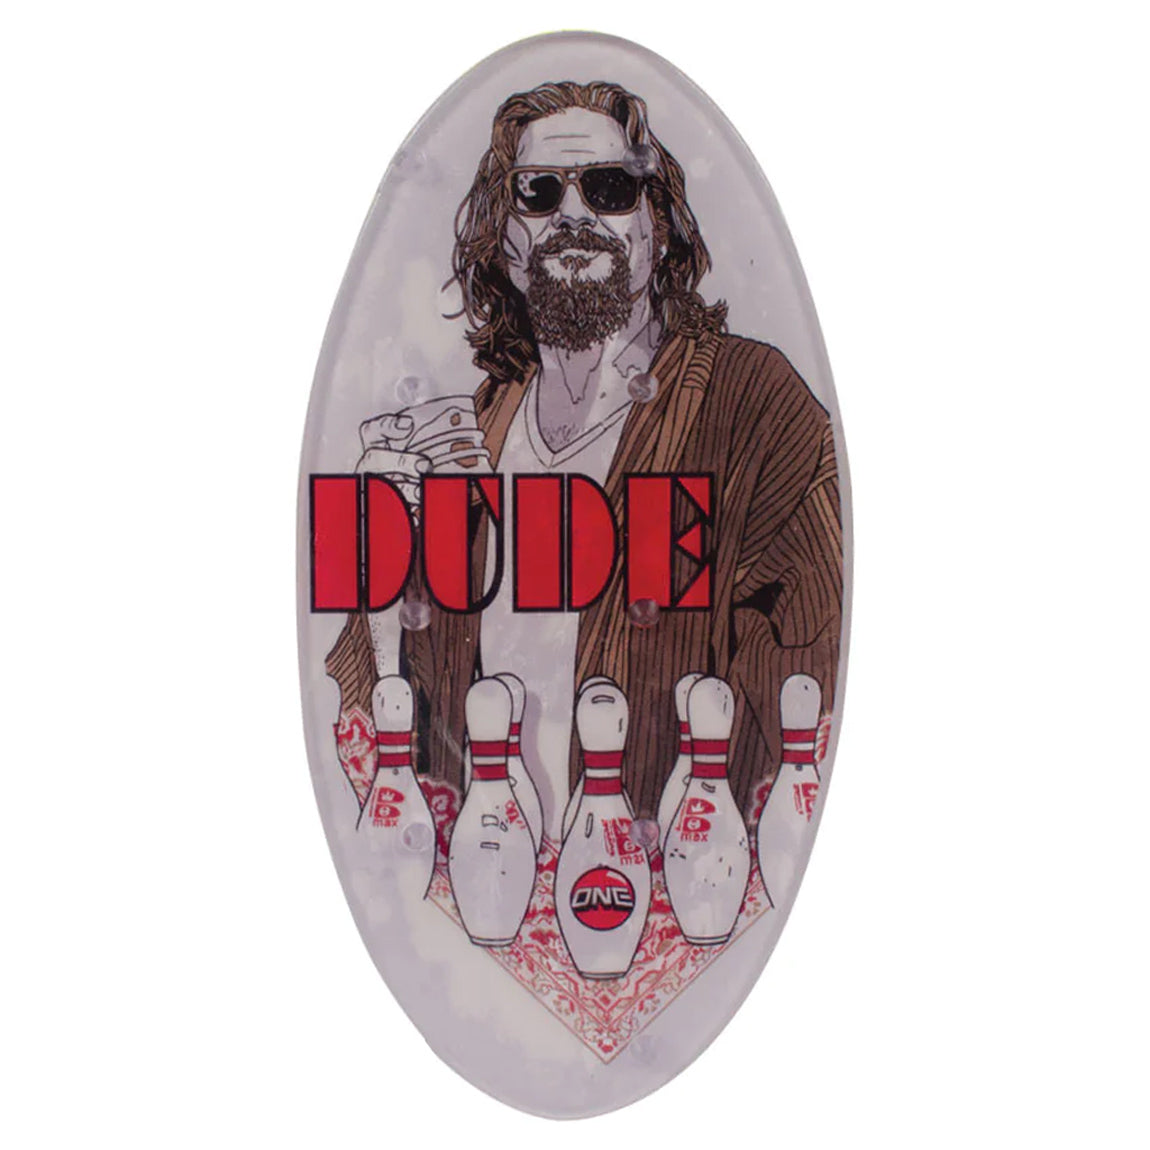 One Ball Jay The Dude Snowboard Stomp Pad image 1